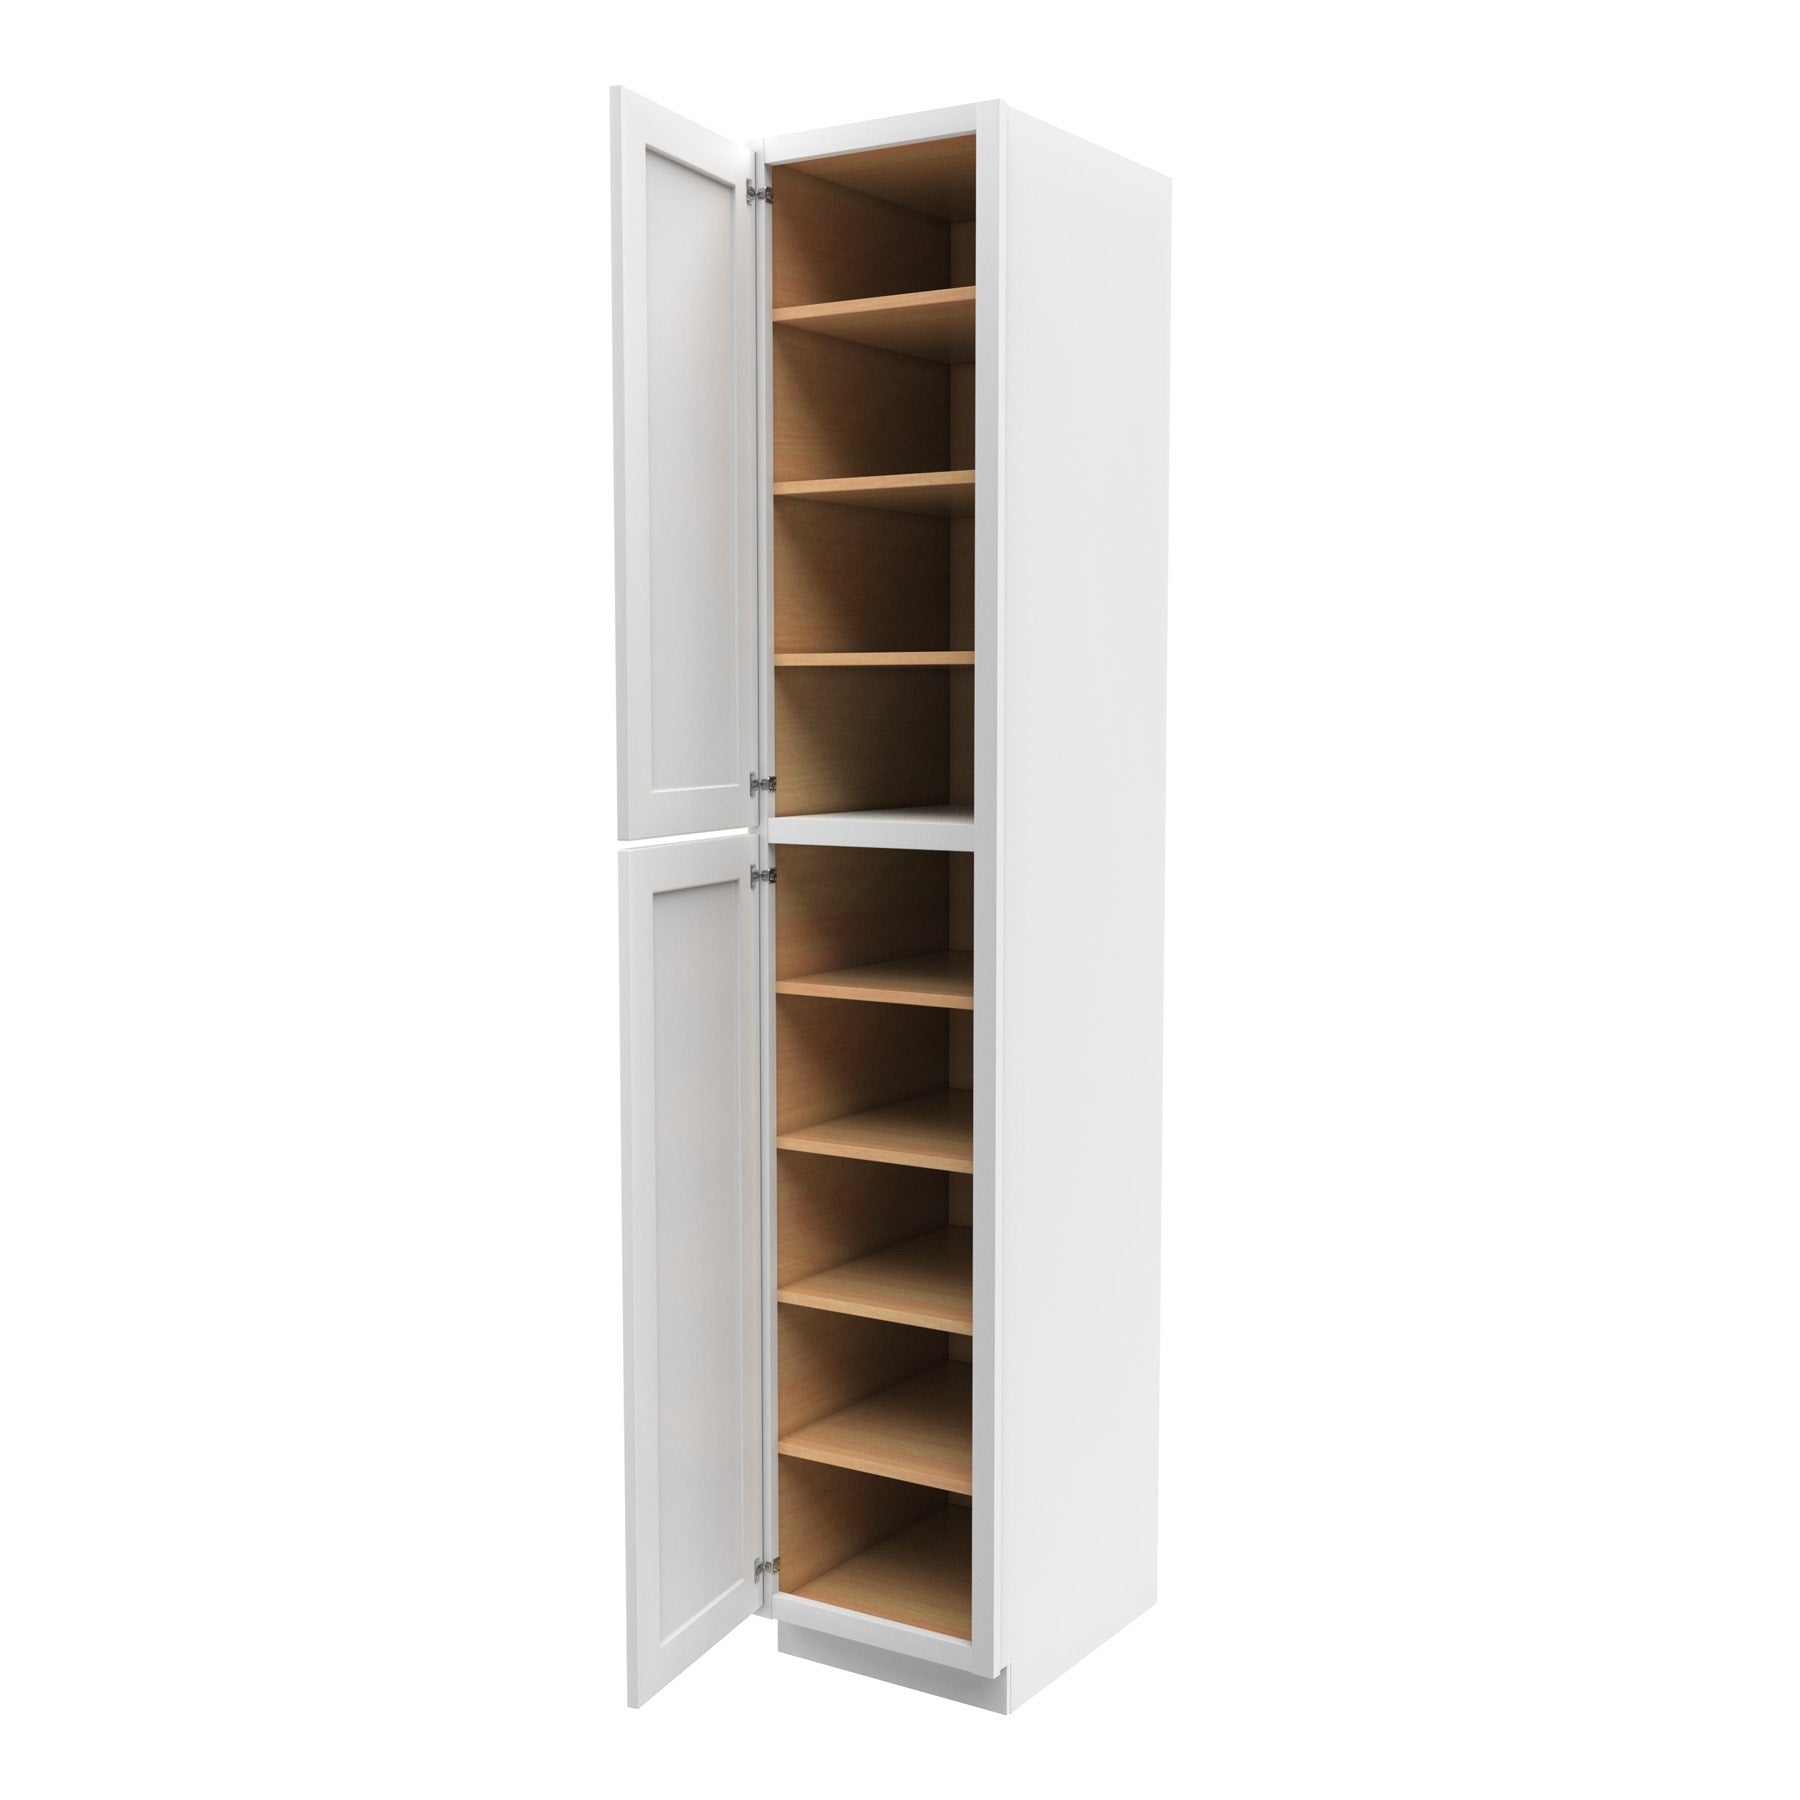 96 Inch High Single Door Tall Cabinet - Luxor White Shaker - Ready To Assemble, 18"W x 96"H x 24"D